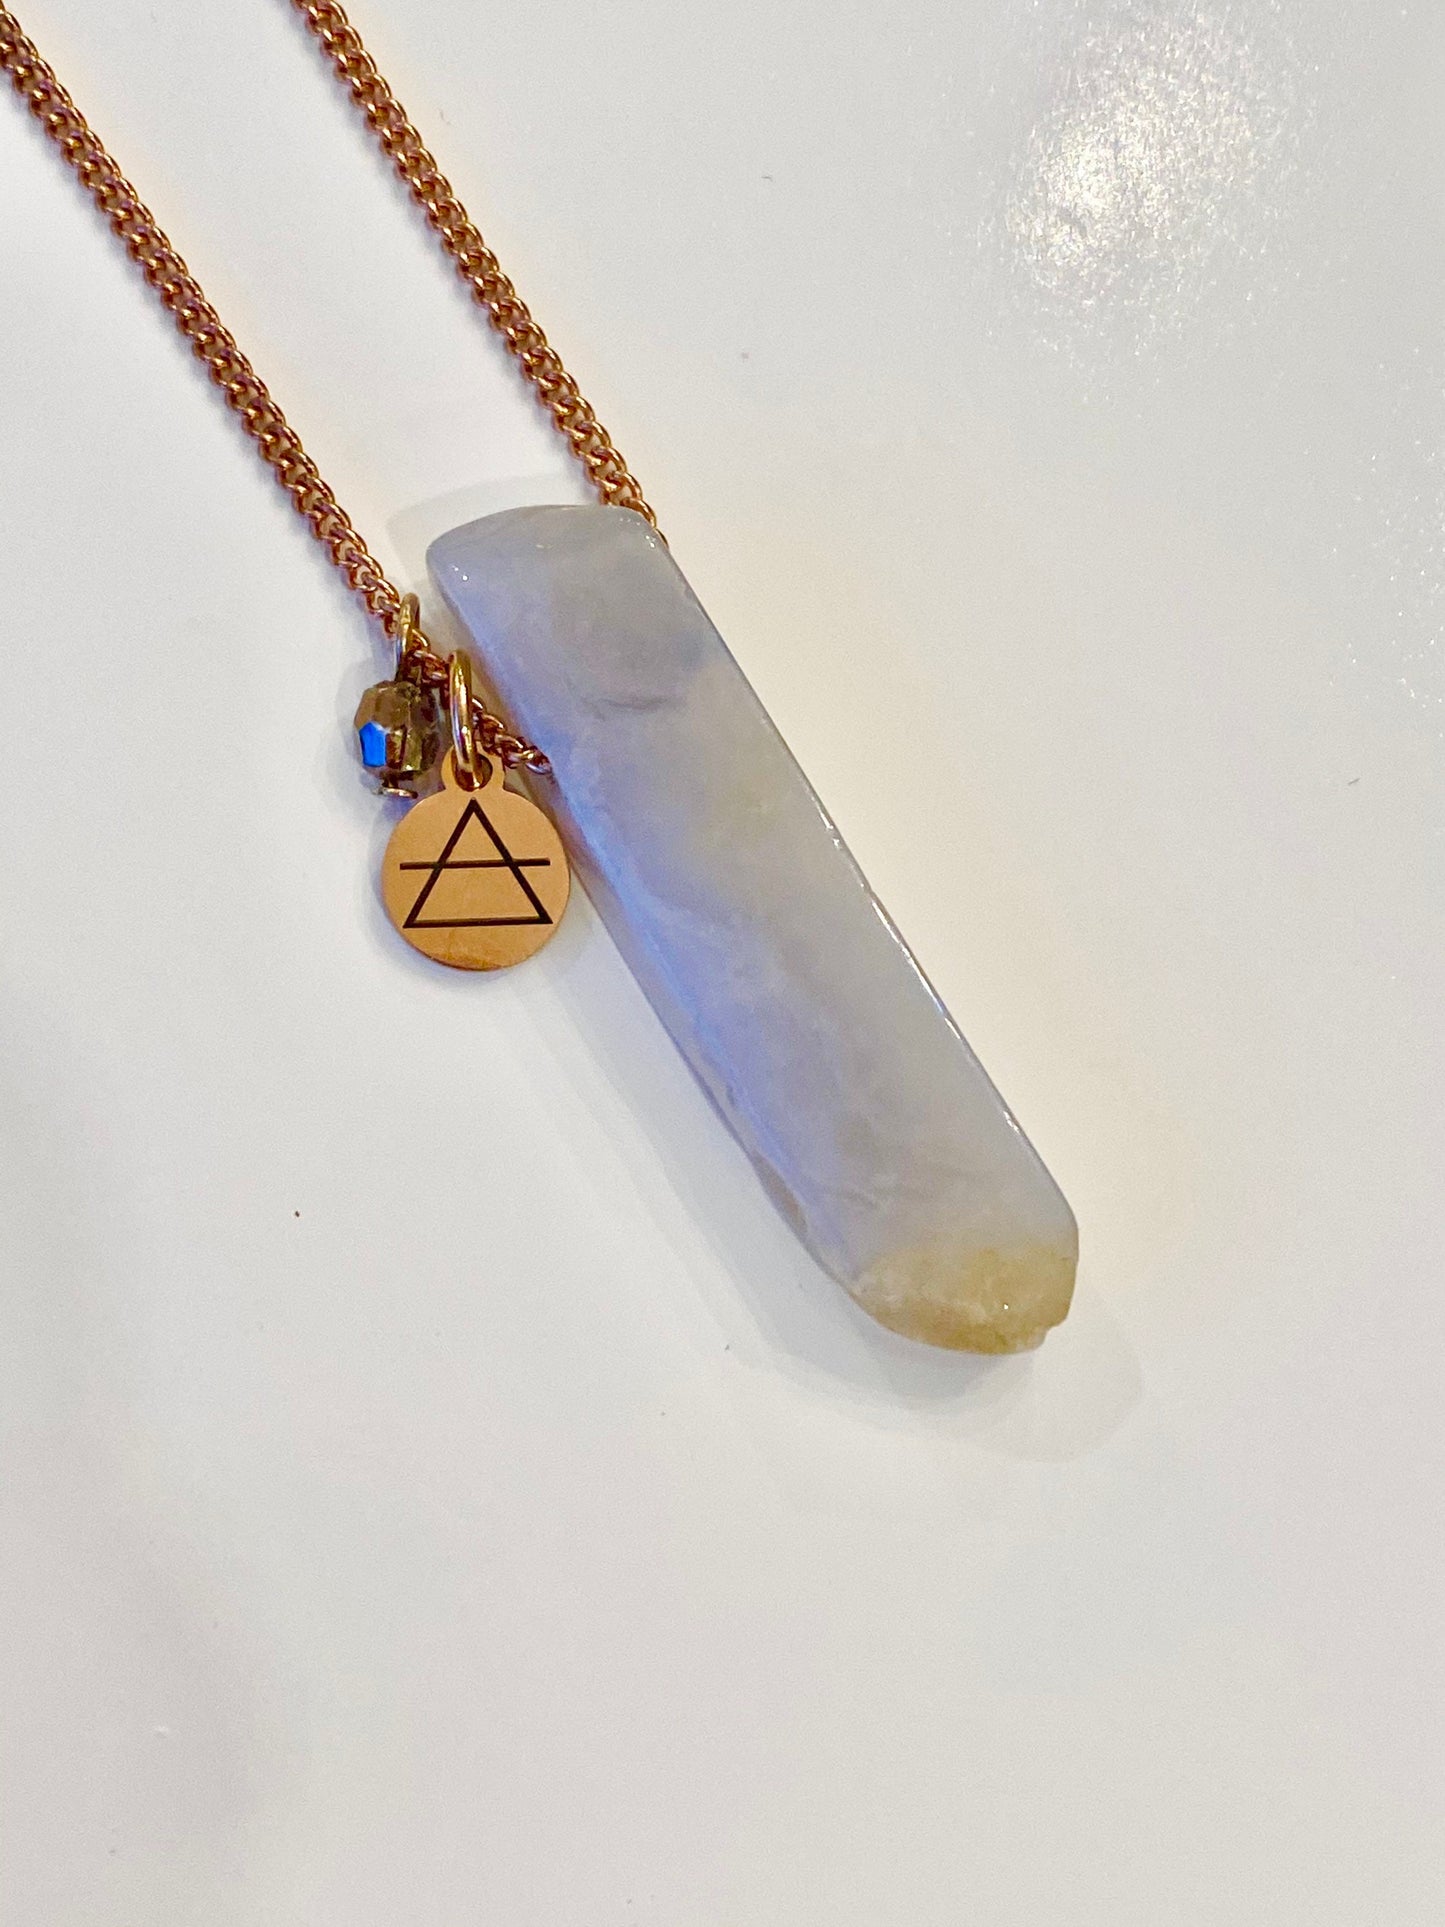 Long rose gold natural stone pendant necklace, crystal necklace, blue lace agate, stainless, natural stone, pendant necklace, healing